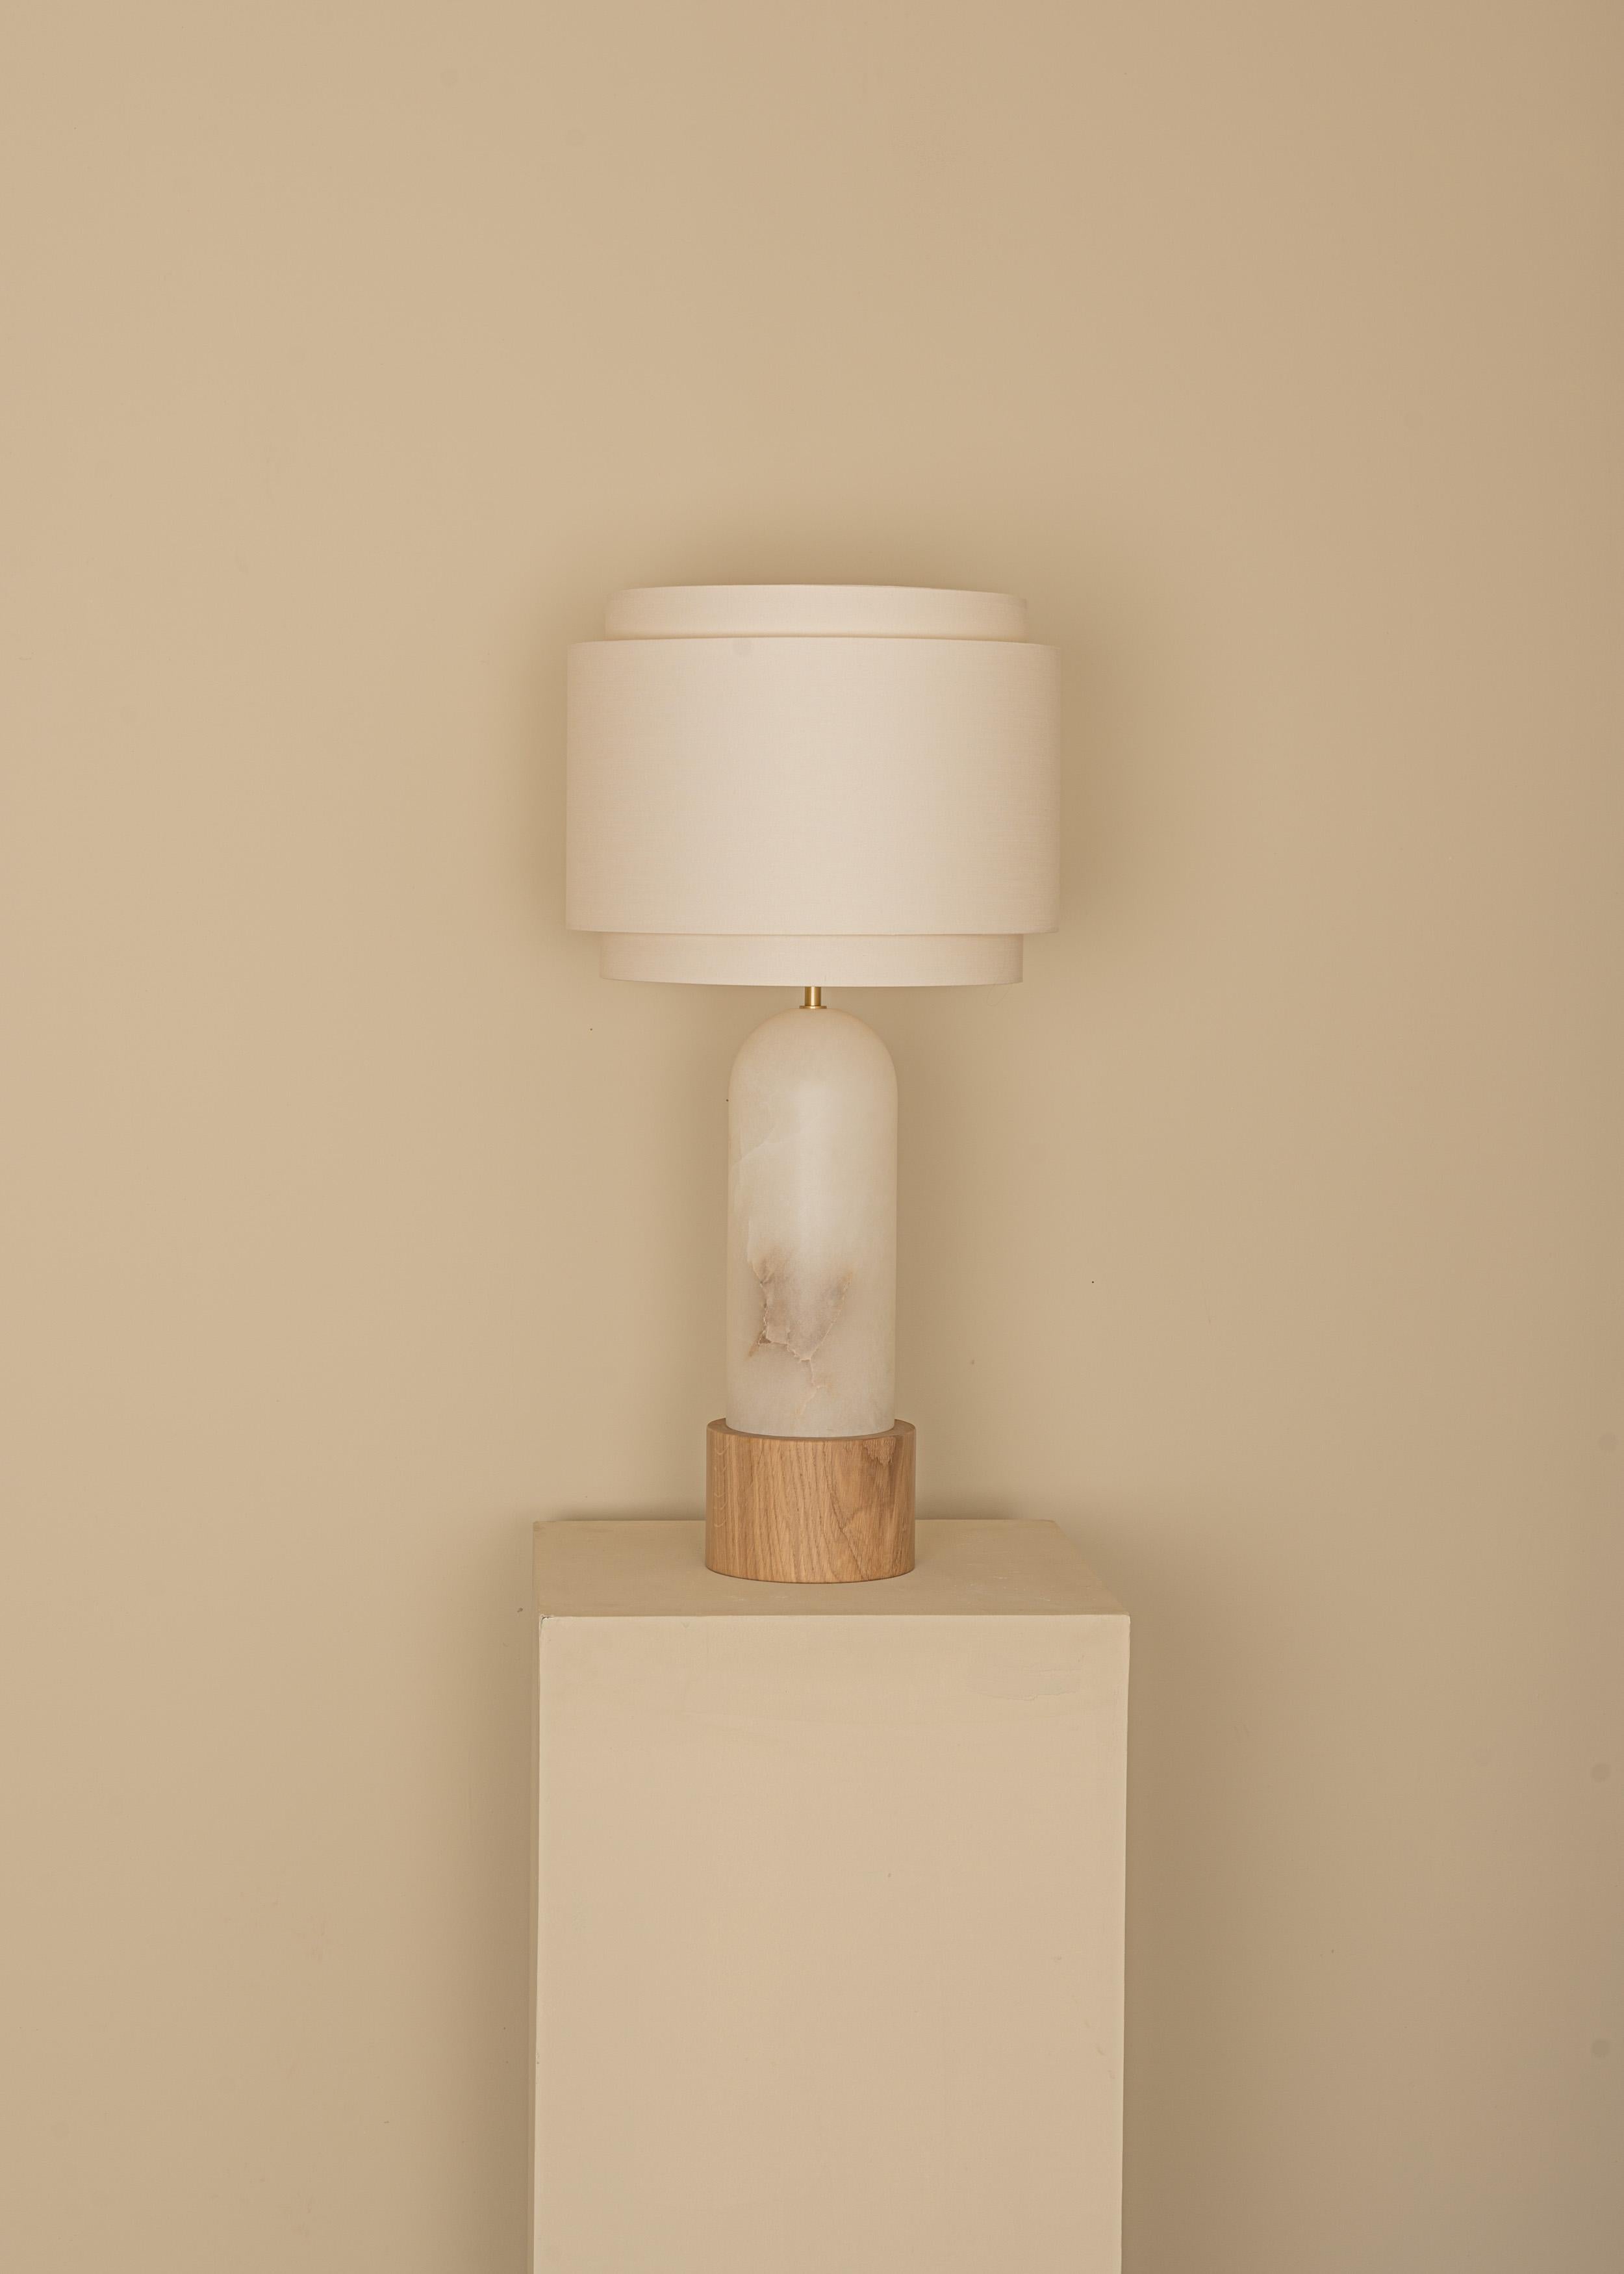 White Alabaster And Oak Base Pura Kelo Double Table Lamp by Simone & Marcel
Dimensions: D 35 x W 35 x H 69 cm.
Materials: Brass, cotton, oak and white alabaster.

Also available in different marble, wood and alabaster options and finishes. Custom